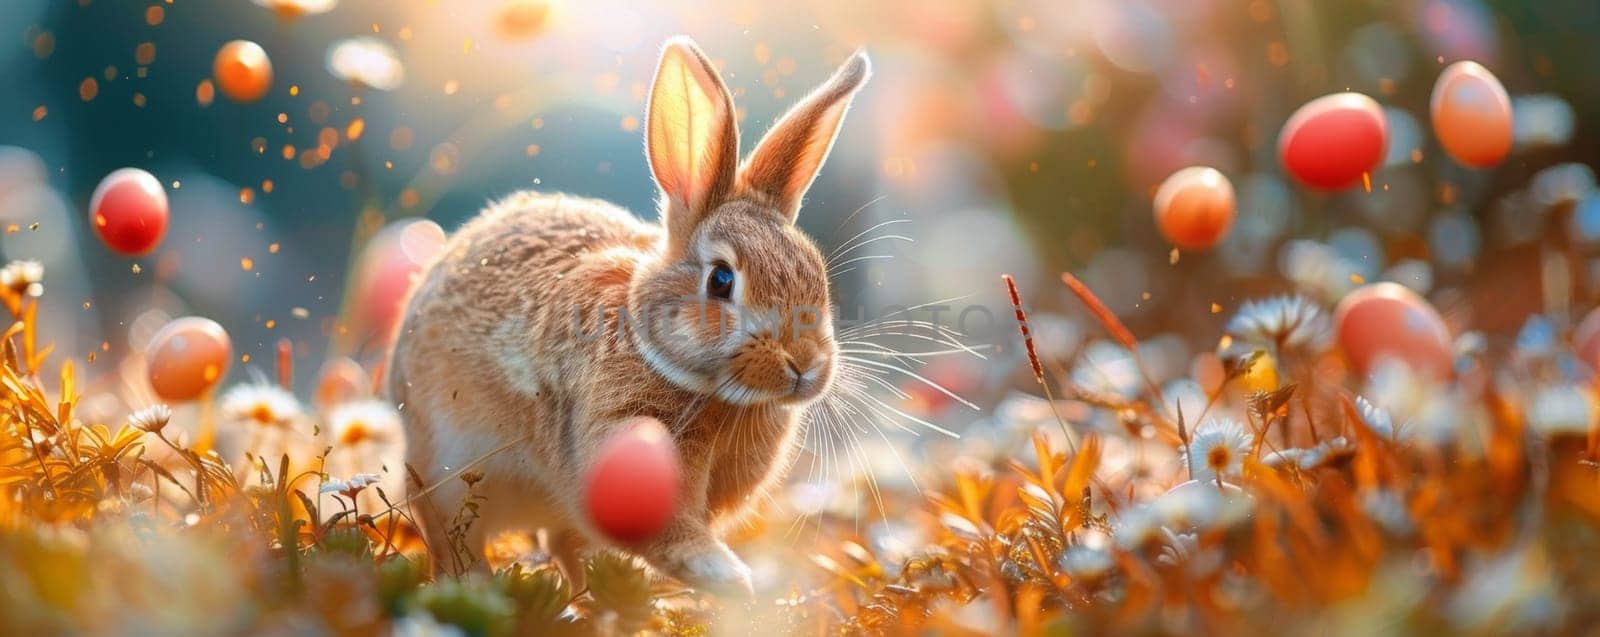 A rabbit is running through a field of flowers and eggs. The rabbit is brown and white, and it is enjoying itself as it runs through the field. The flowers and eggs create a sense of playfulness